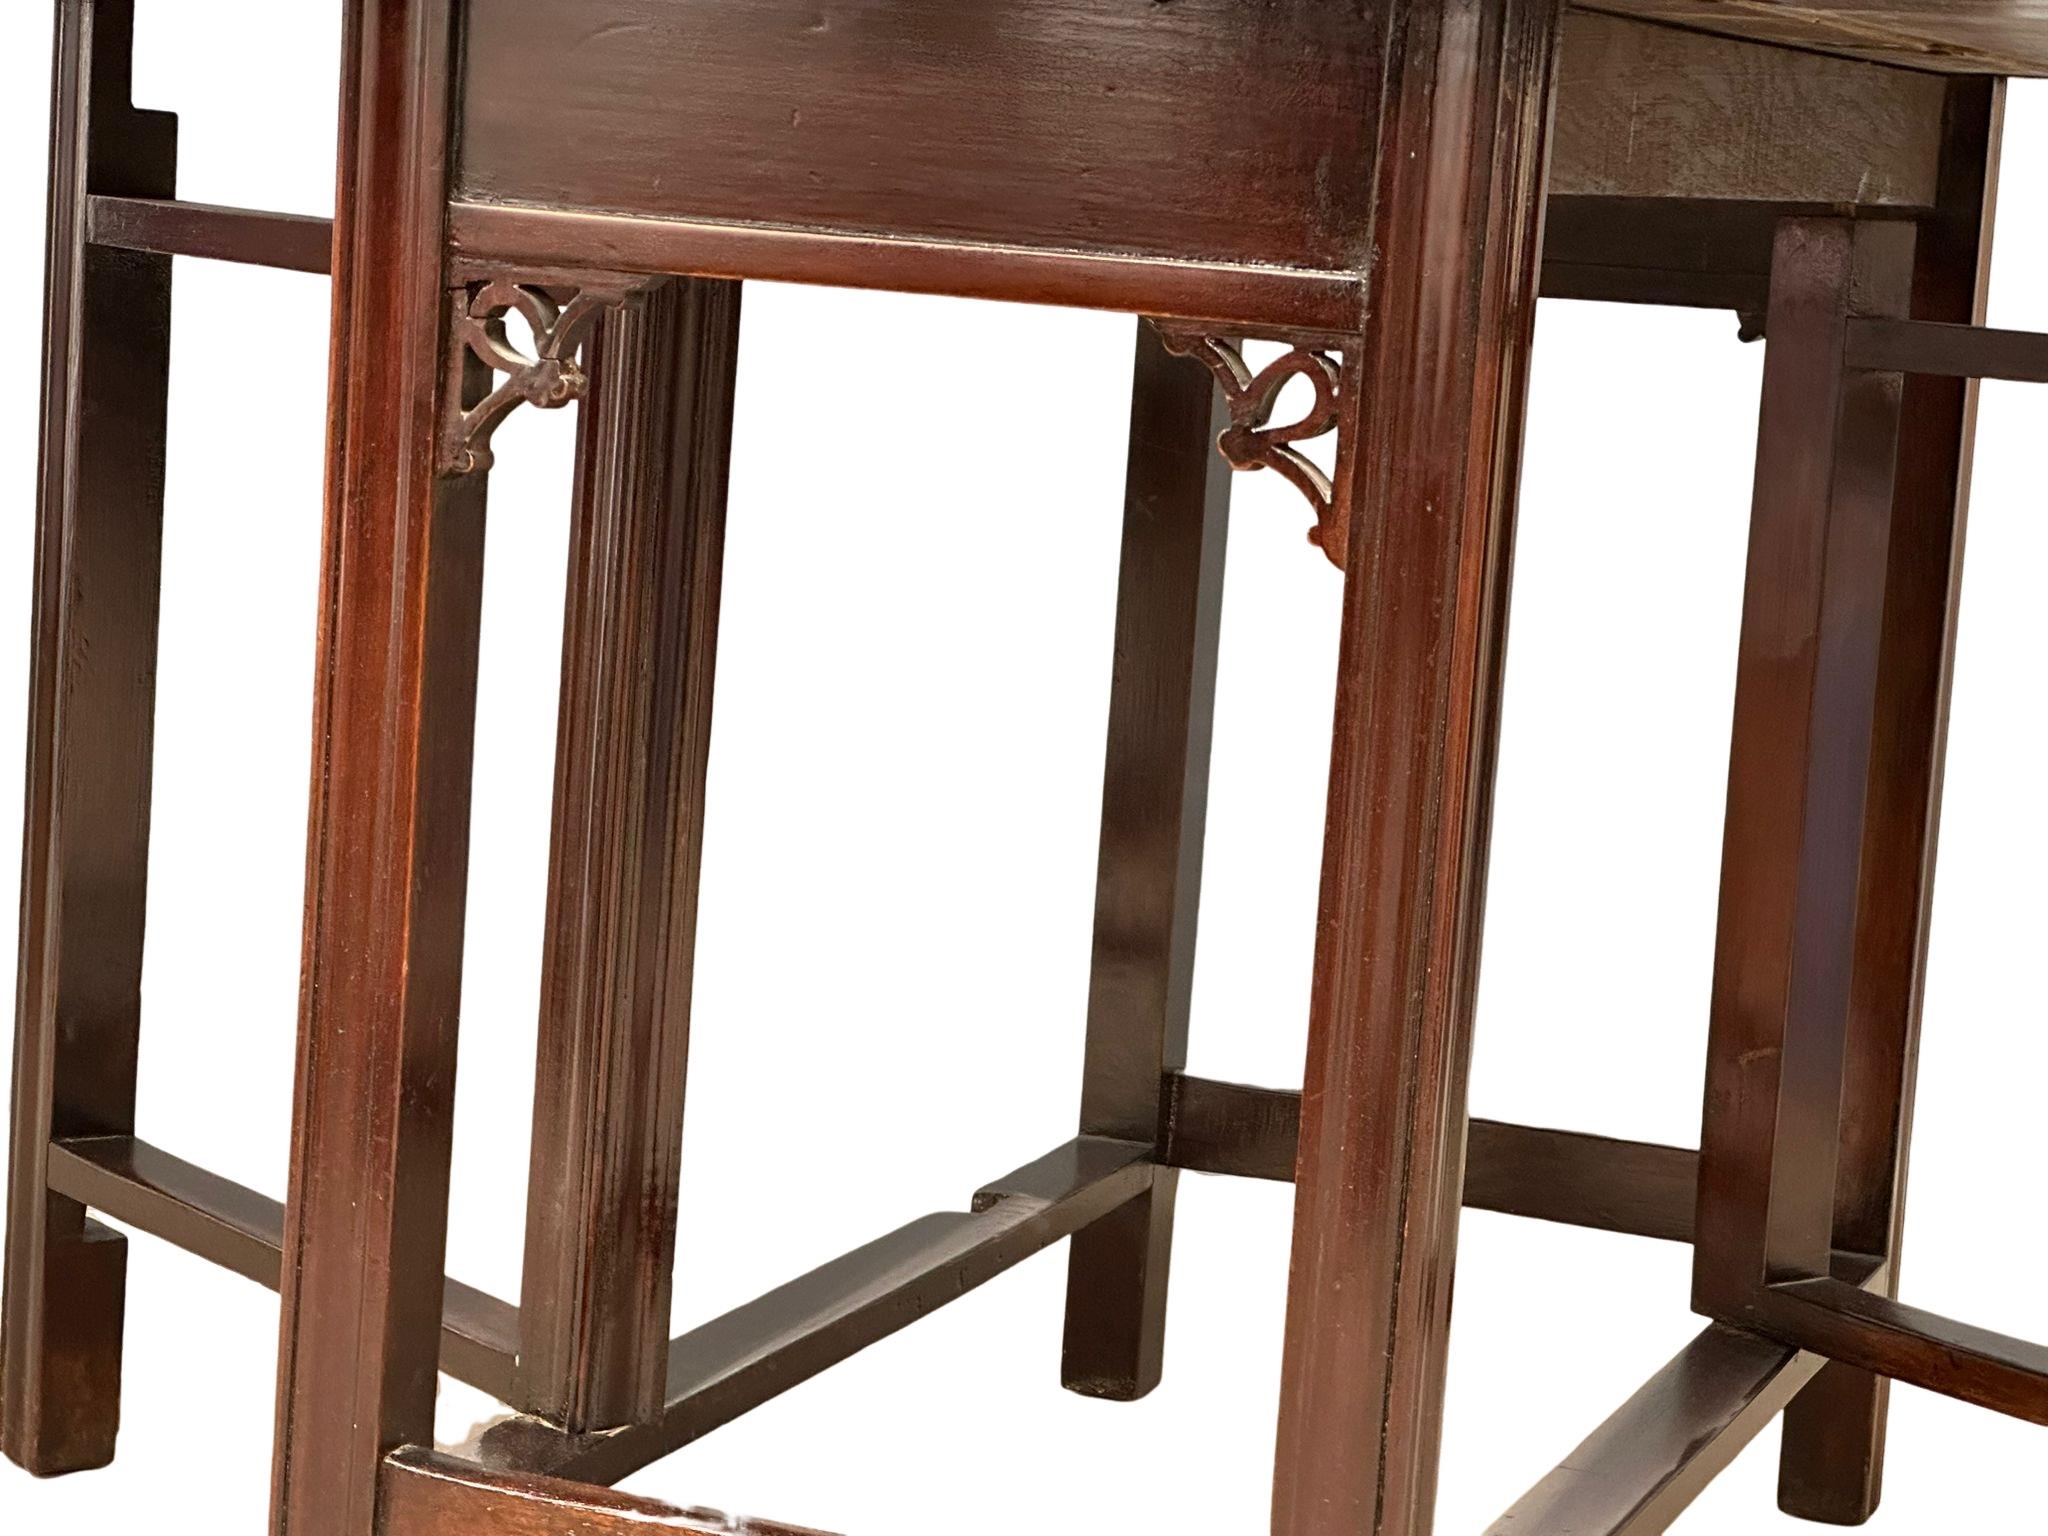 An early 19th century Chinese Chippendale style drop-leaf dining table, circa 1800-1820. 145cm x - Image 5 of 5